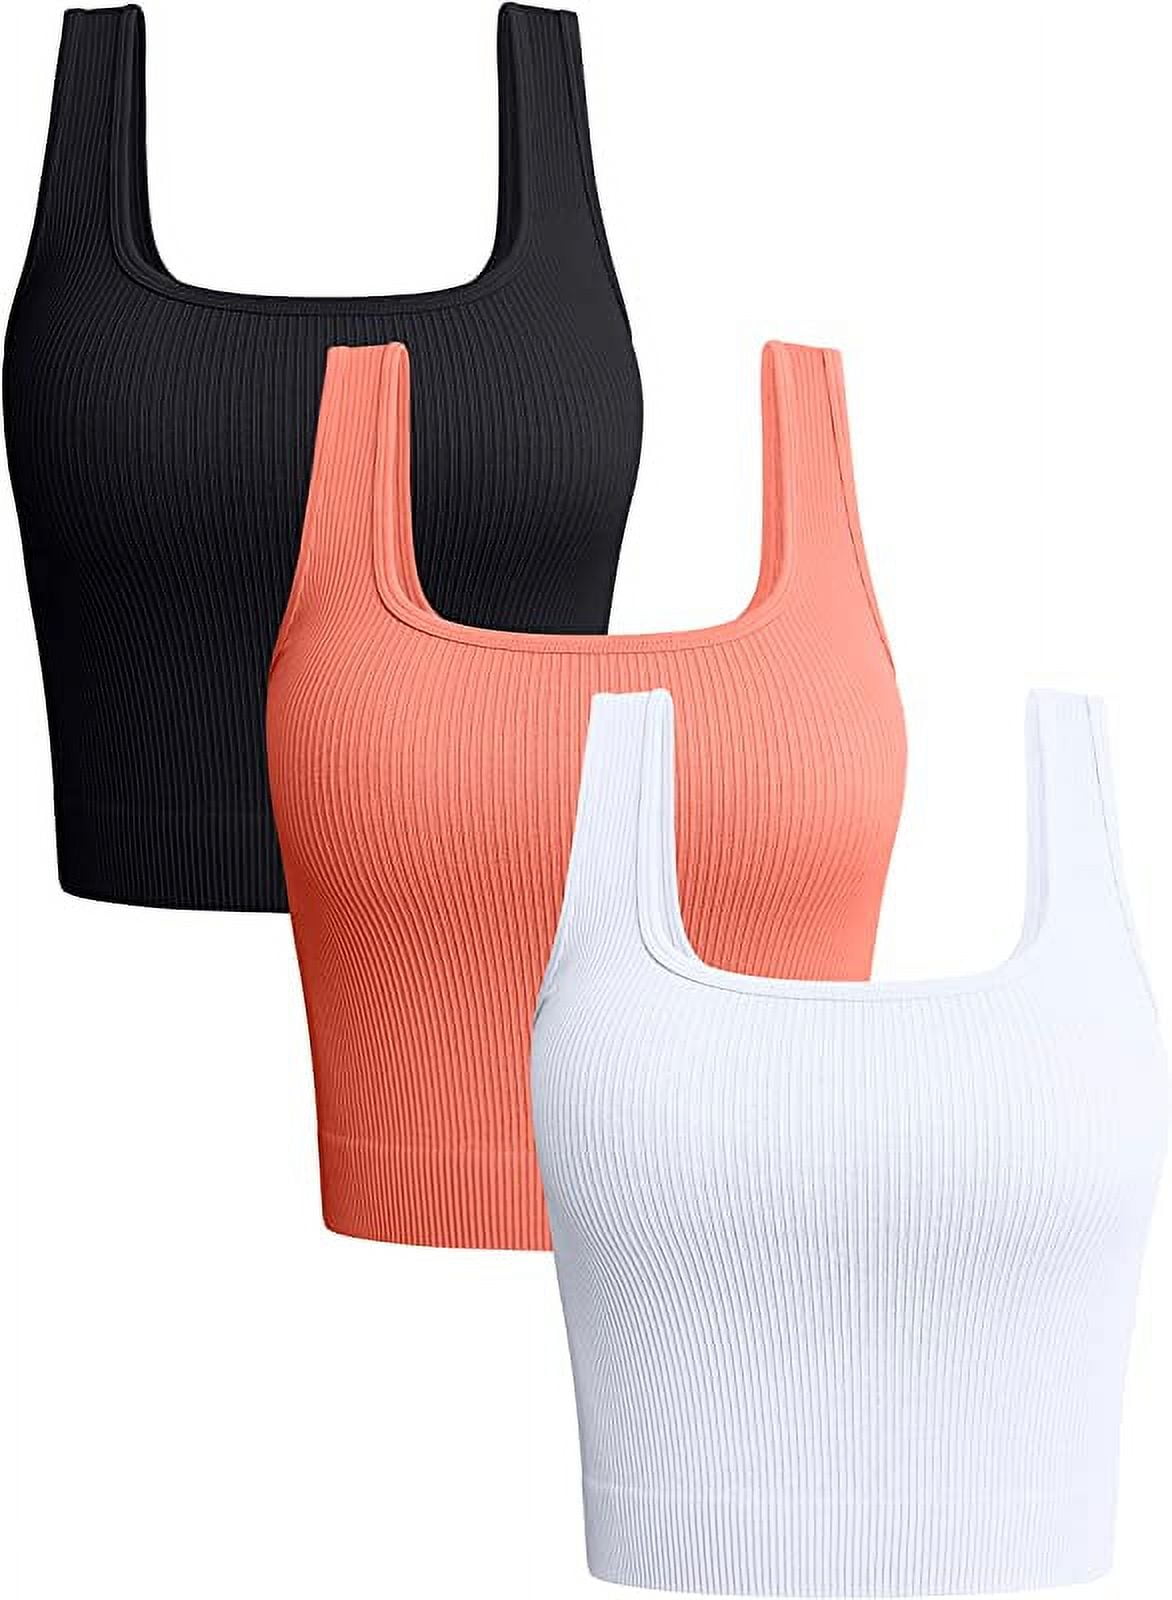 .com .com: OQQ Women's 3 Piece Crop Tops Ribbed Long Sleeve  Workout Tops One Shoulder Yoga Crop Top Exercise Sports Bra Beige :  Clothing, Shoes & Jewelry